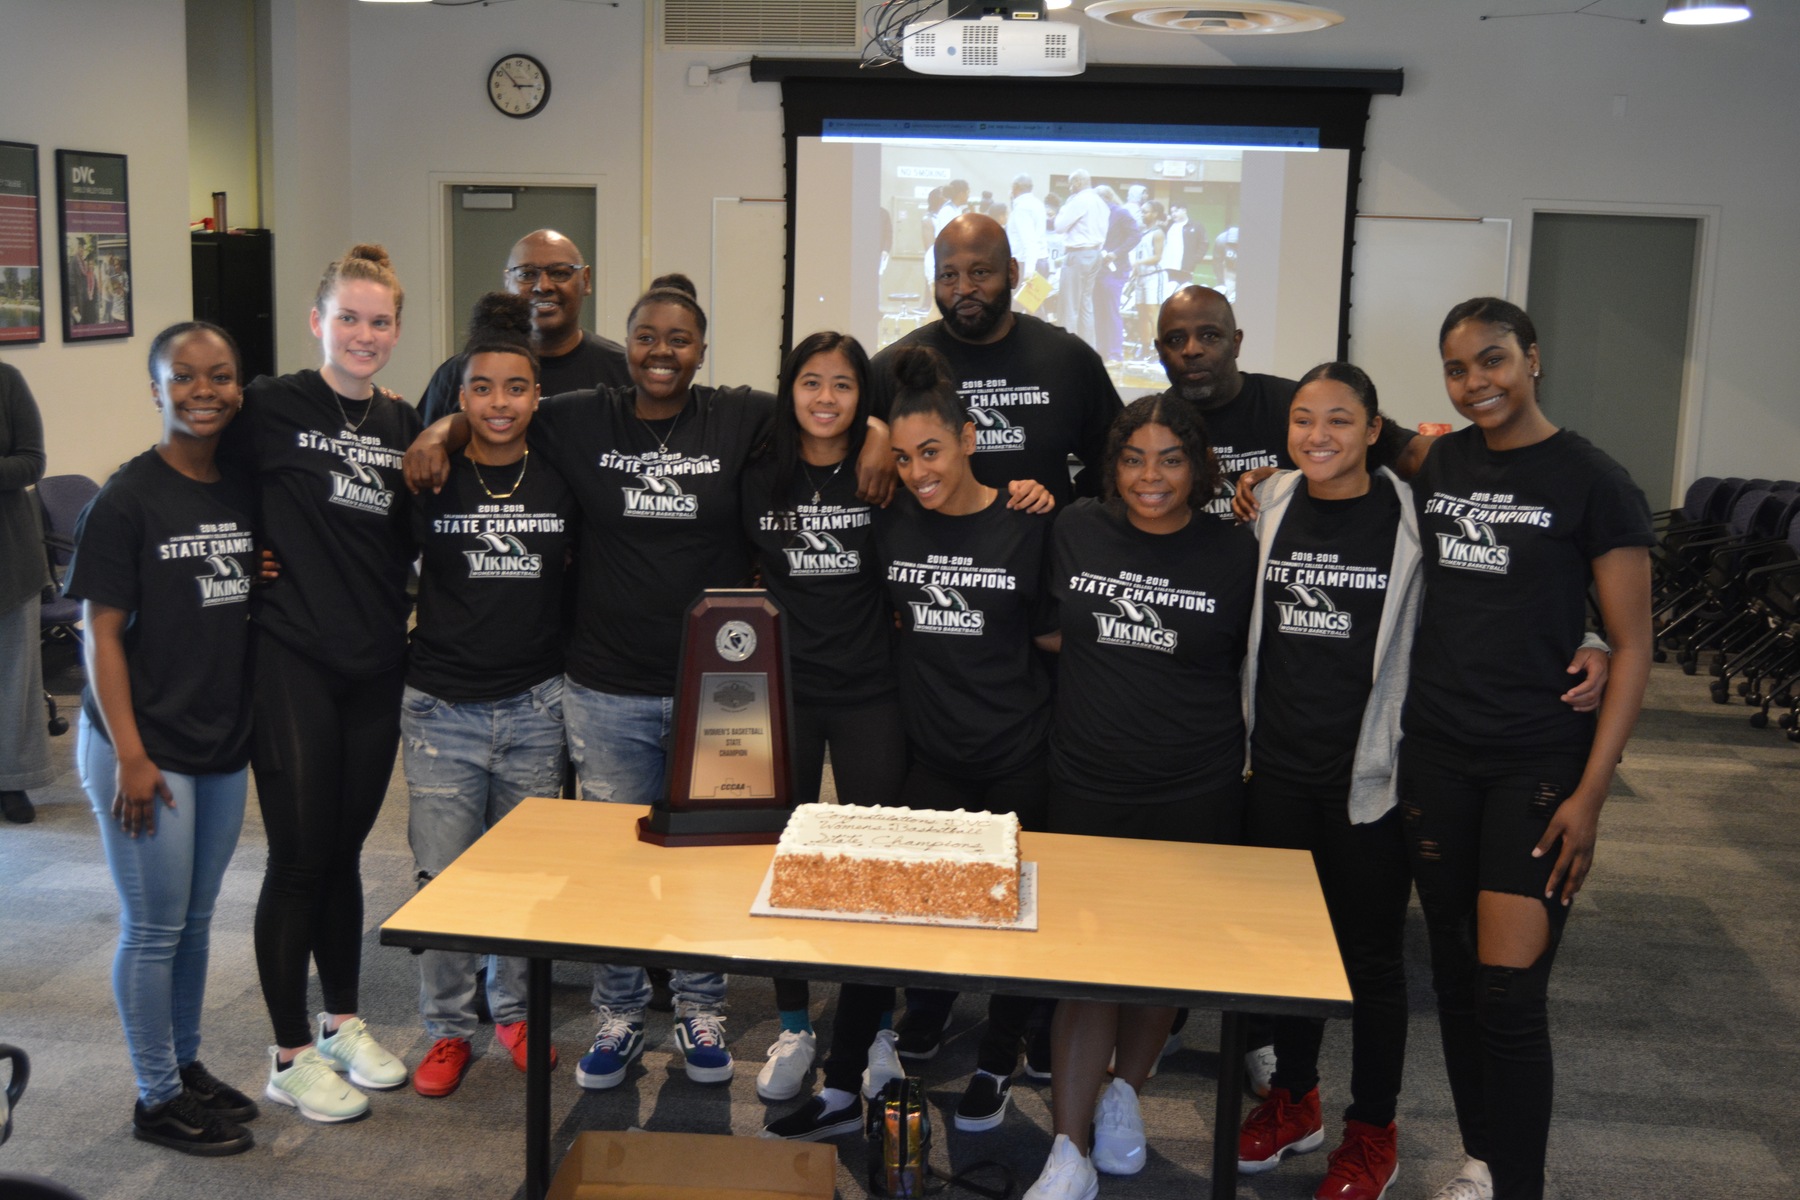 WBB State Championship Recognition Event Photos